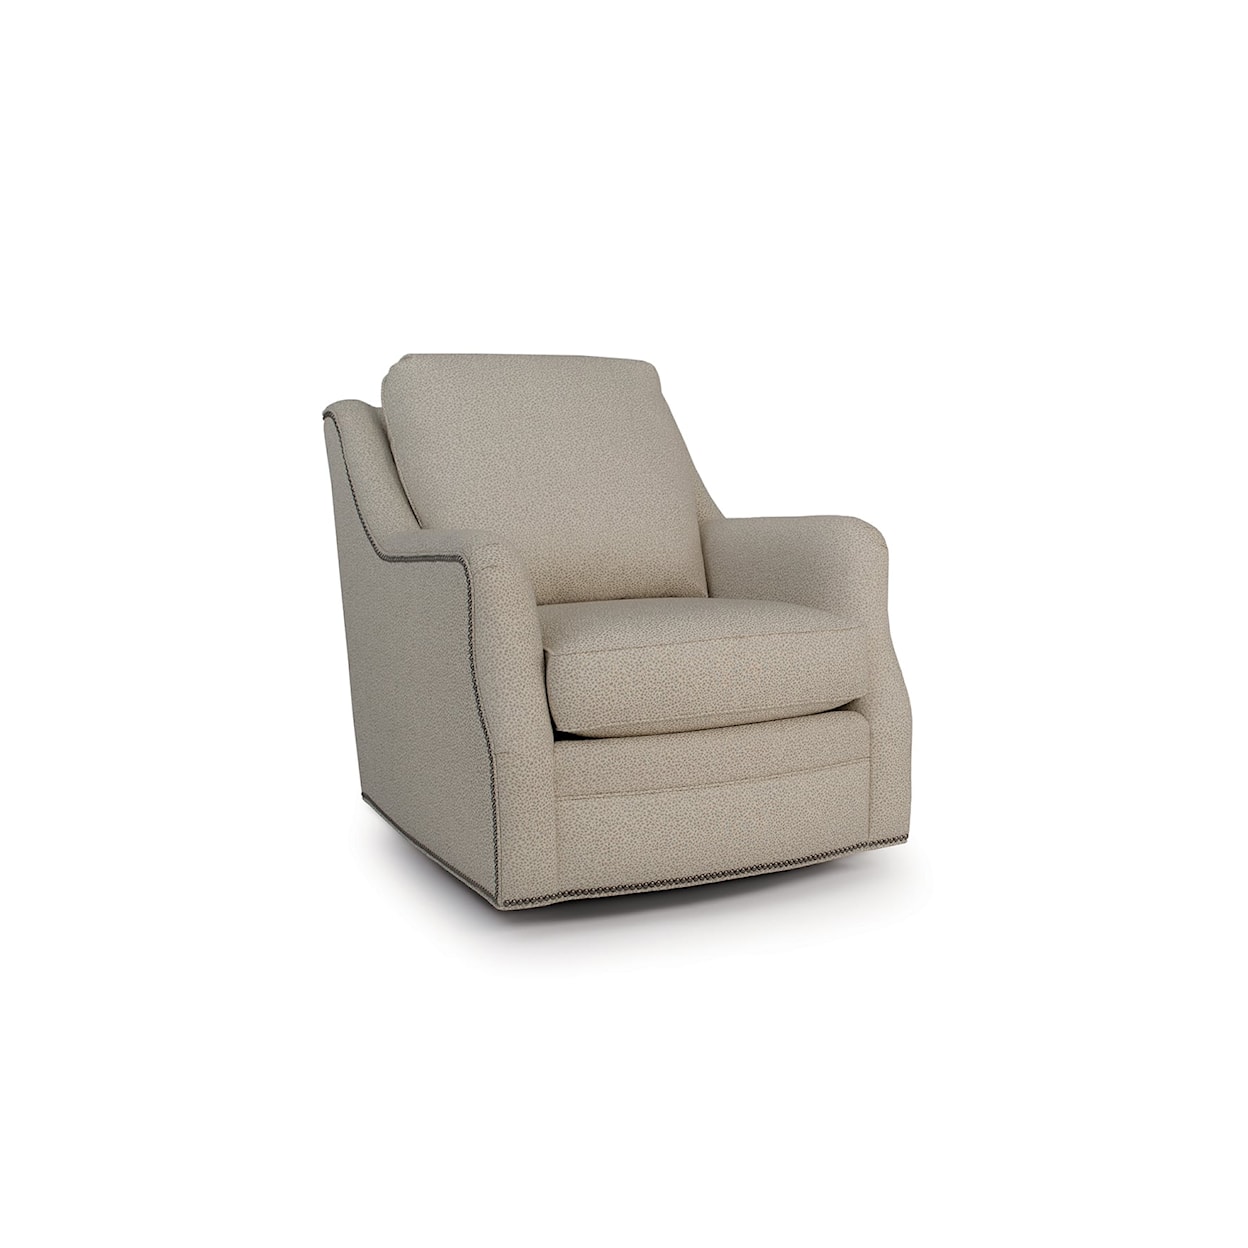 Smith Brothers 563 Swivel Glider Chair